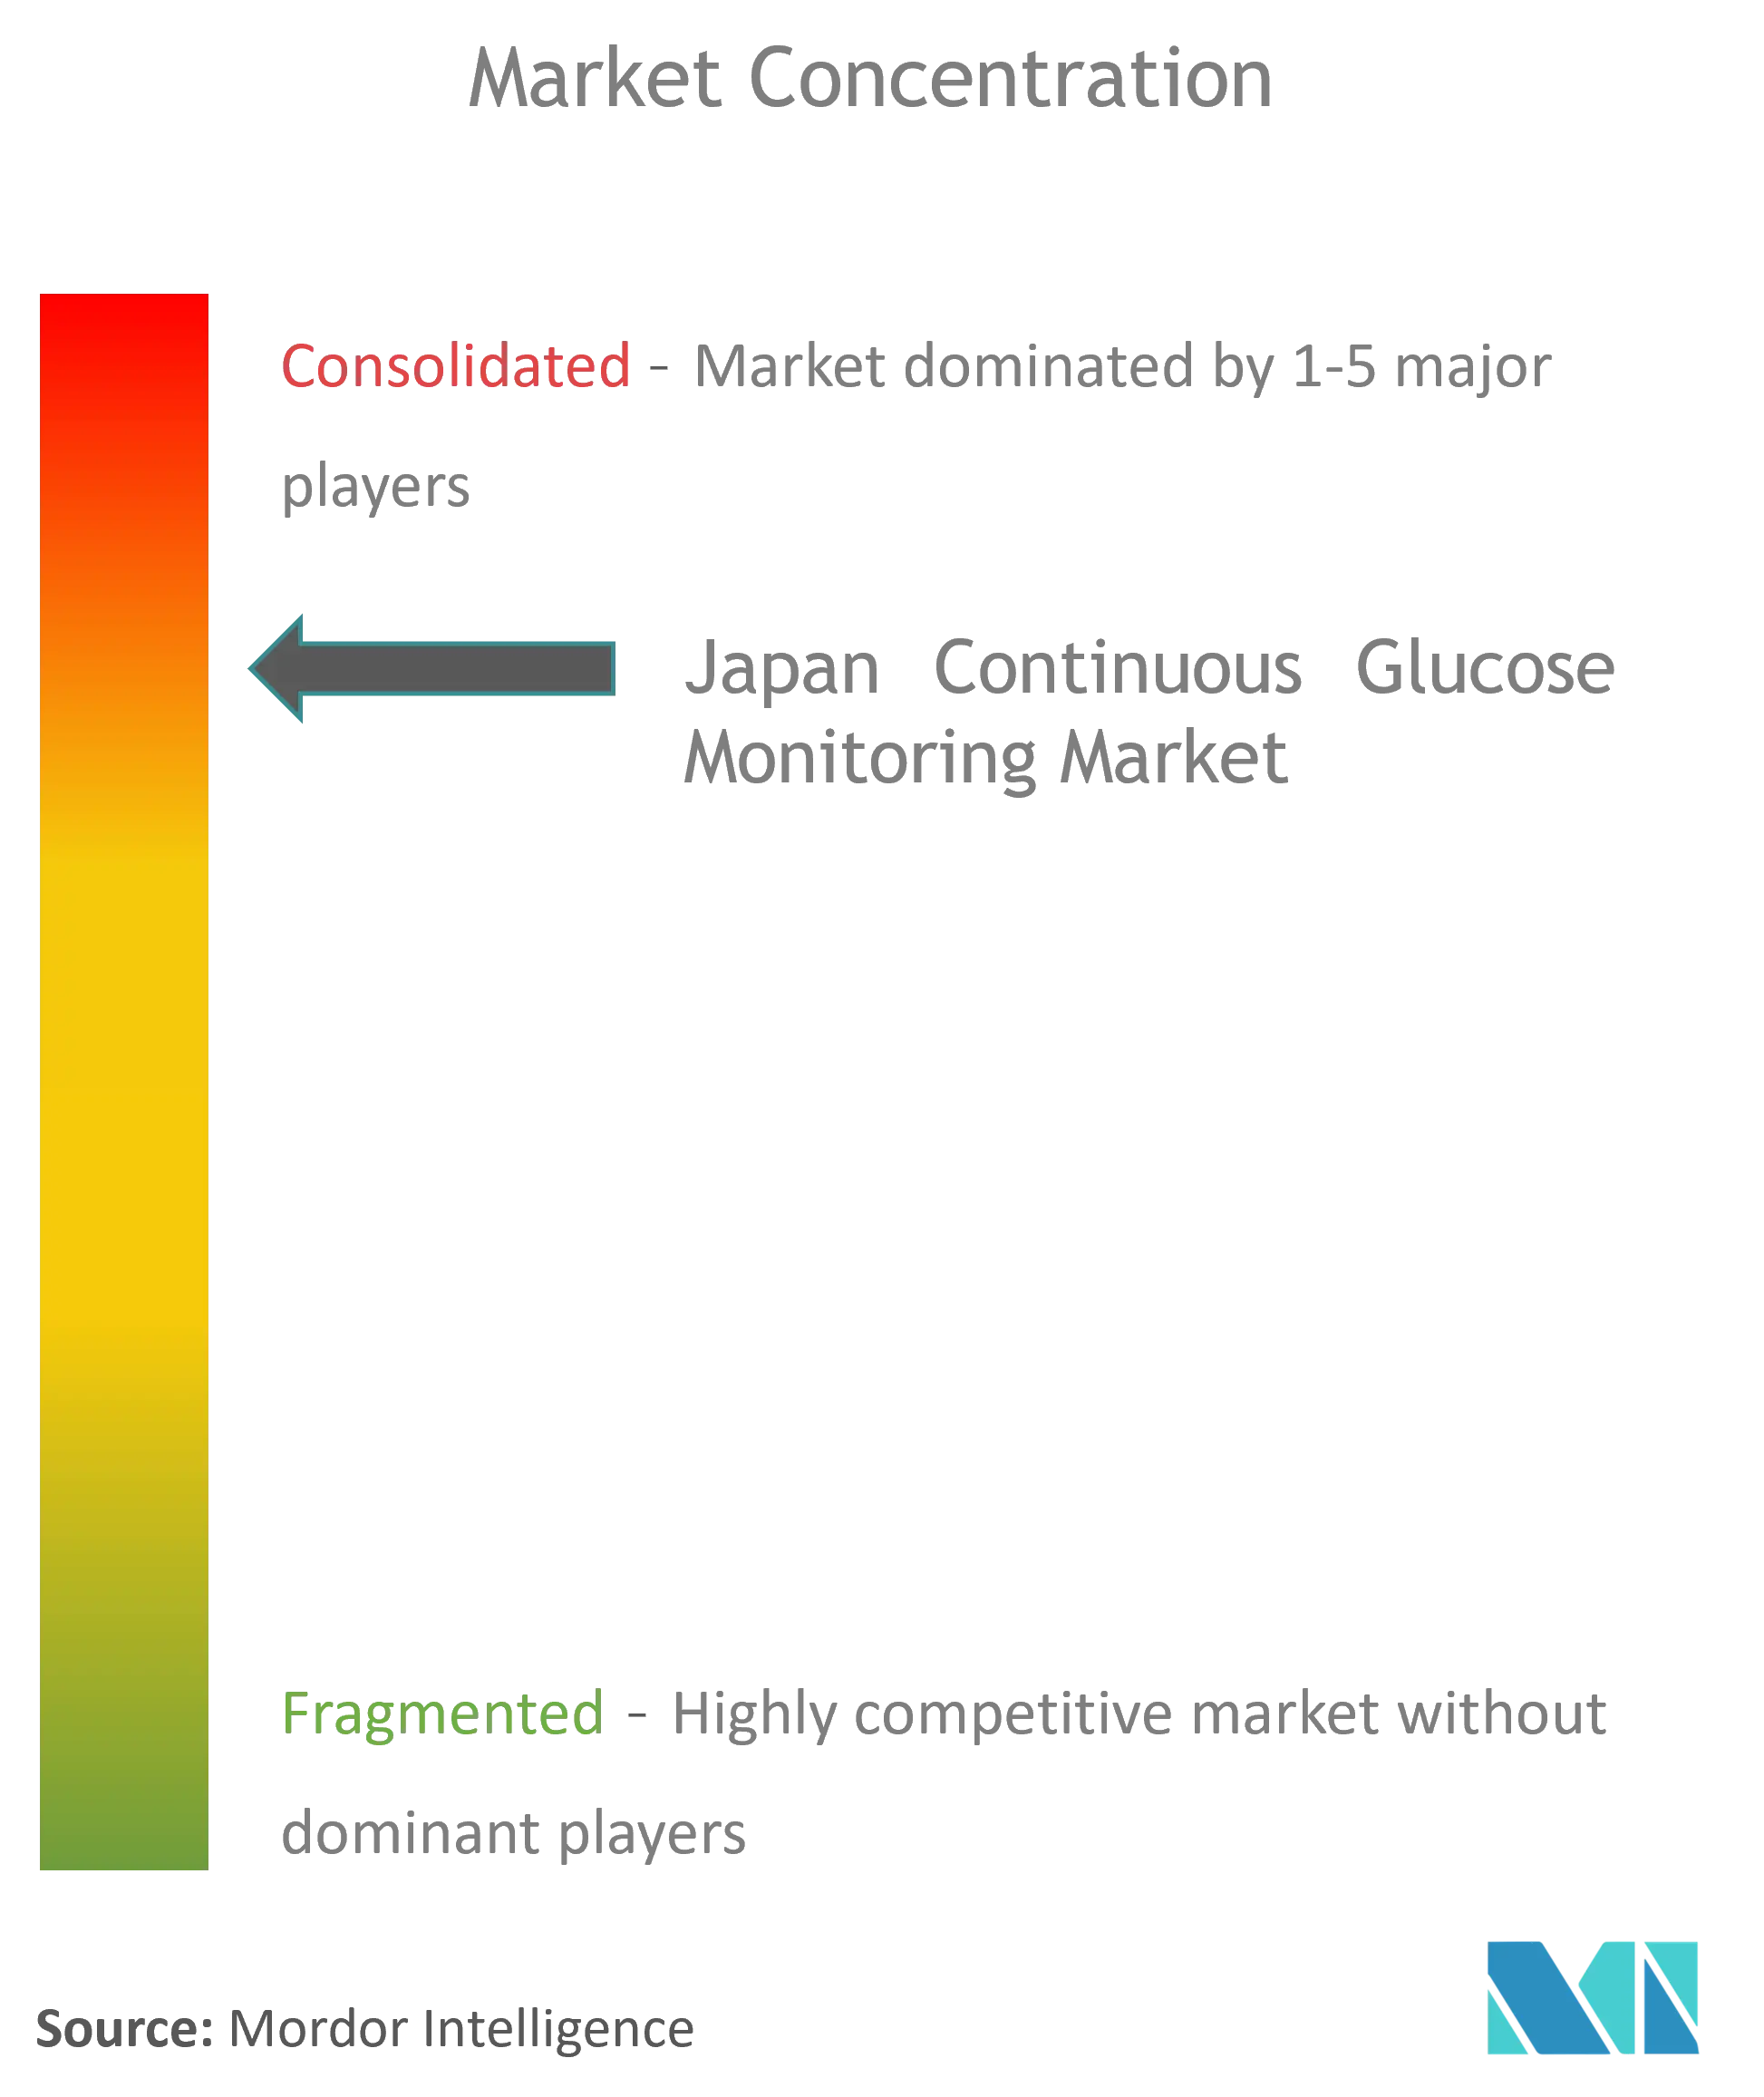 Japan Continuous Glucose Monitoring Devices Market Concentration